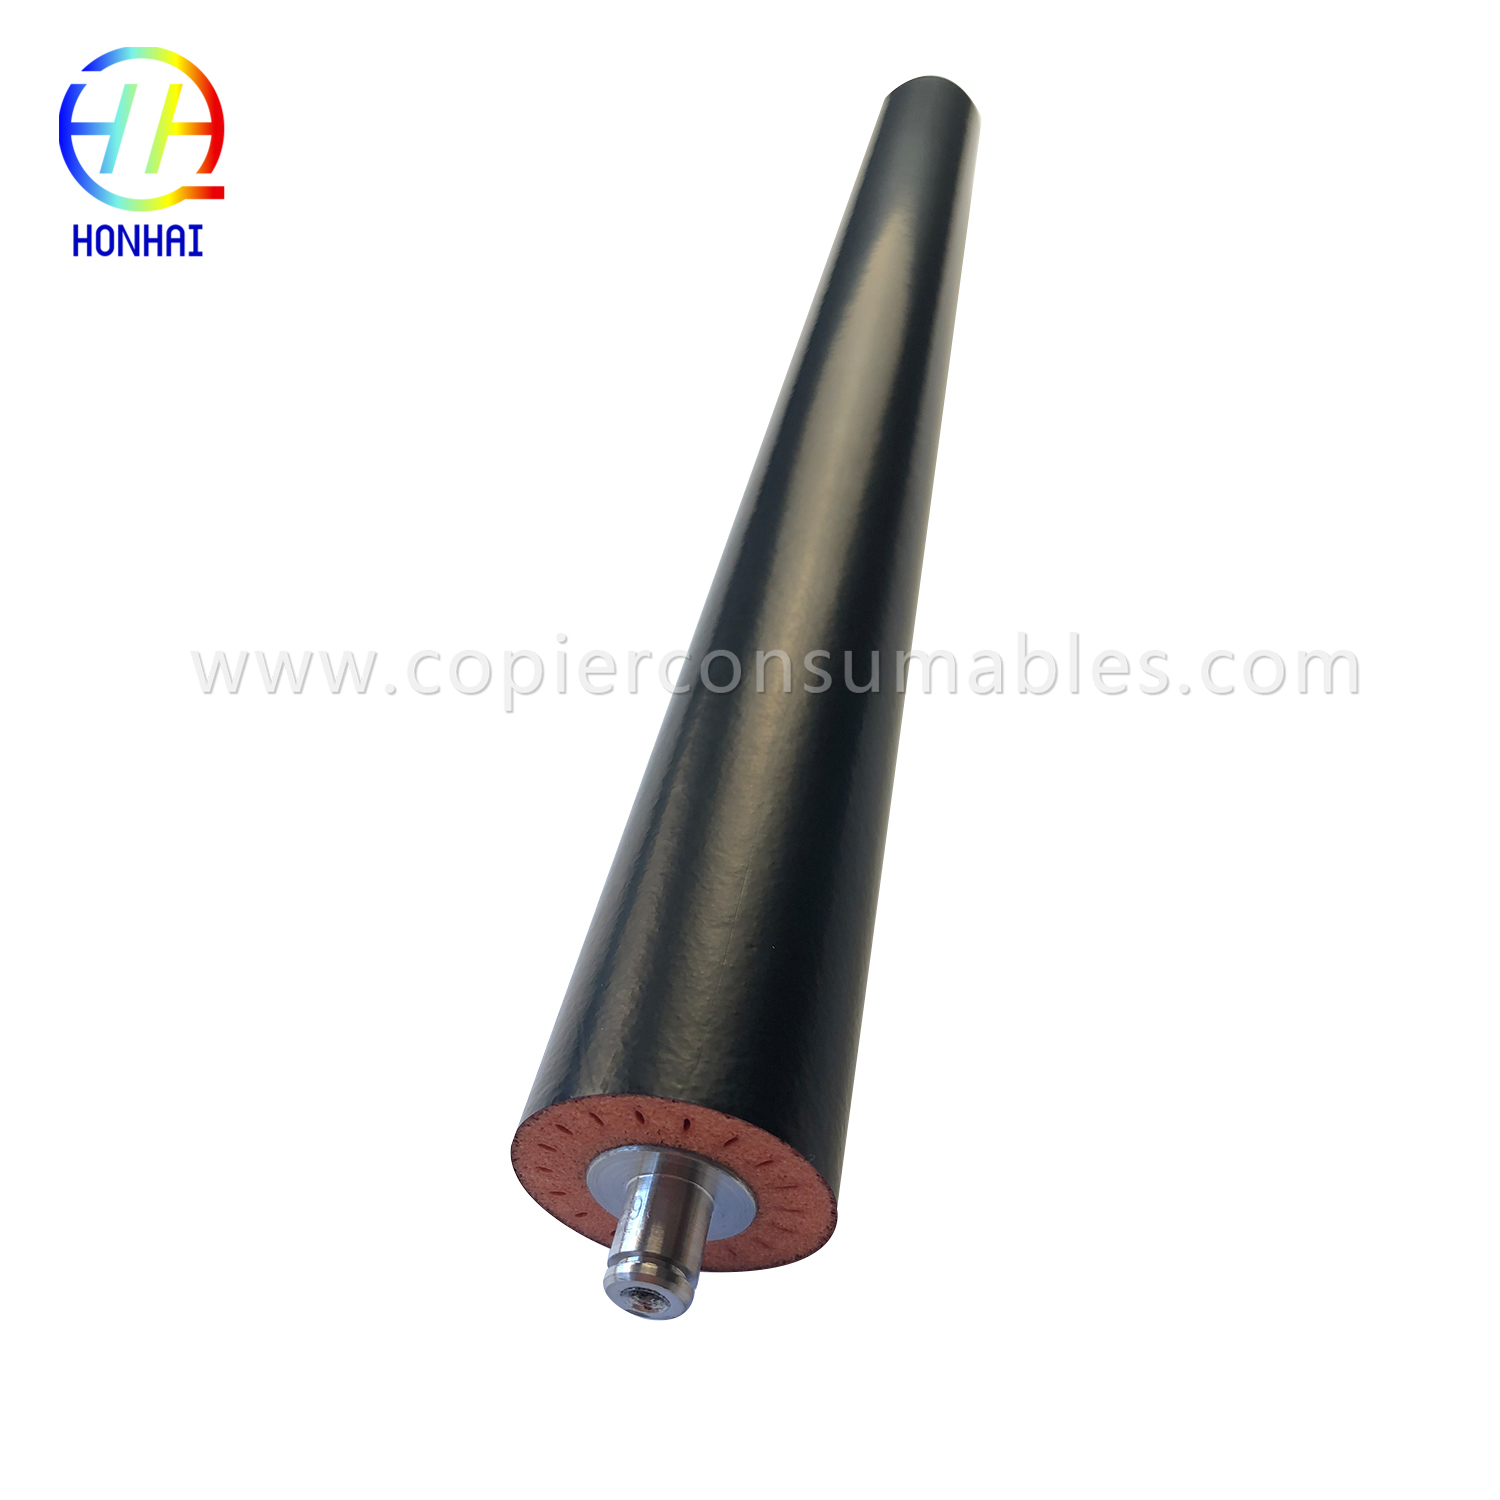 Lower Pressure Roller for Xerox Dc450 451 550 551 600 606 706